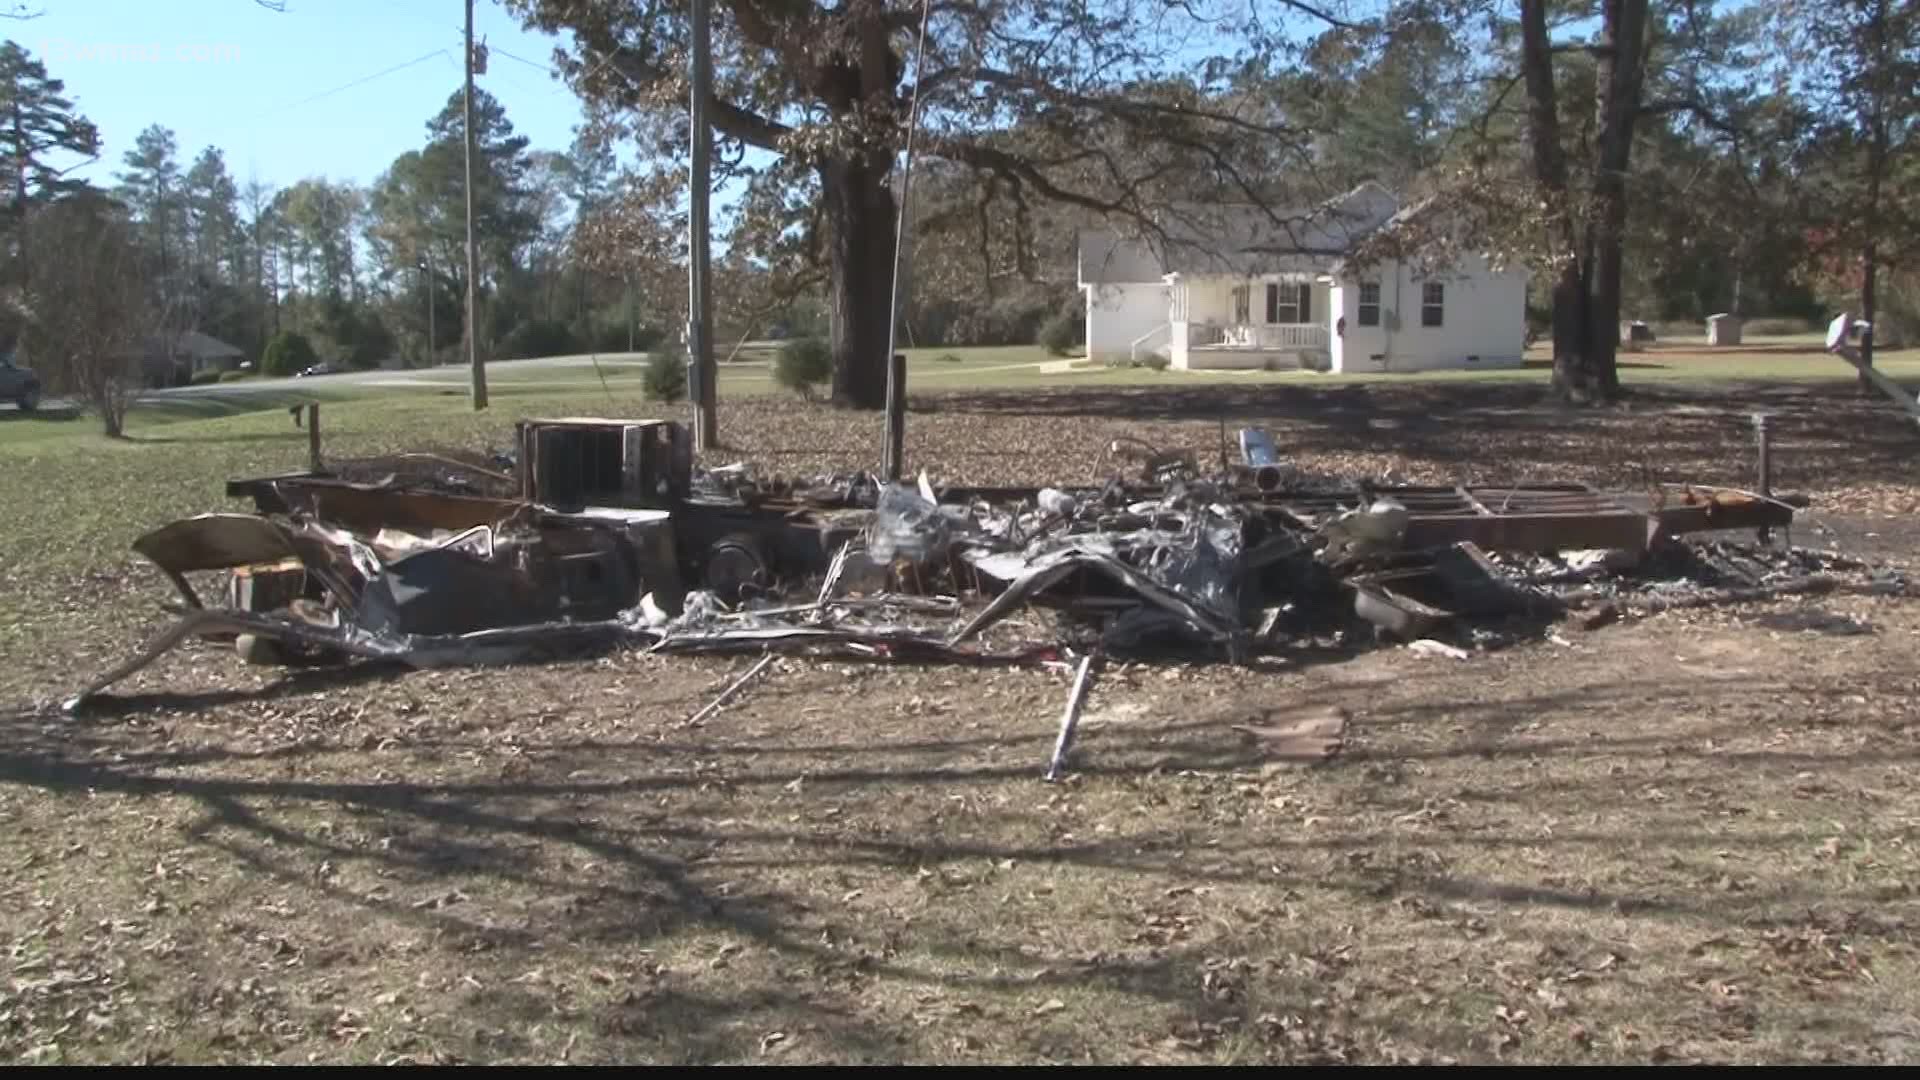 On November 8th, Tiffany Waters got a call from her landlord saying that her home burned down as she was dropping her children off with their babysitter.